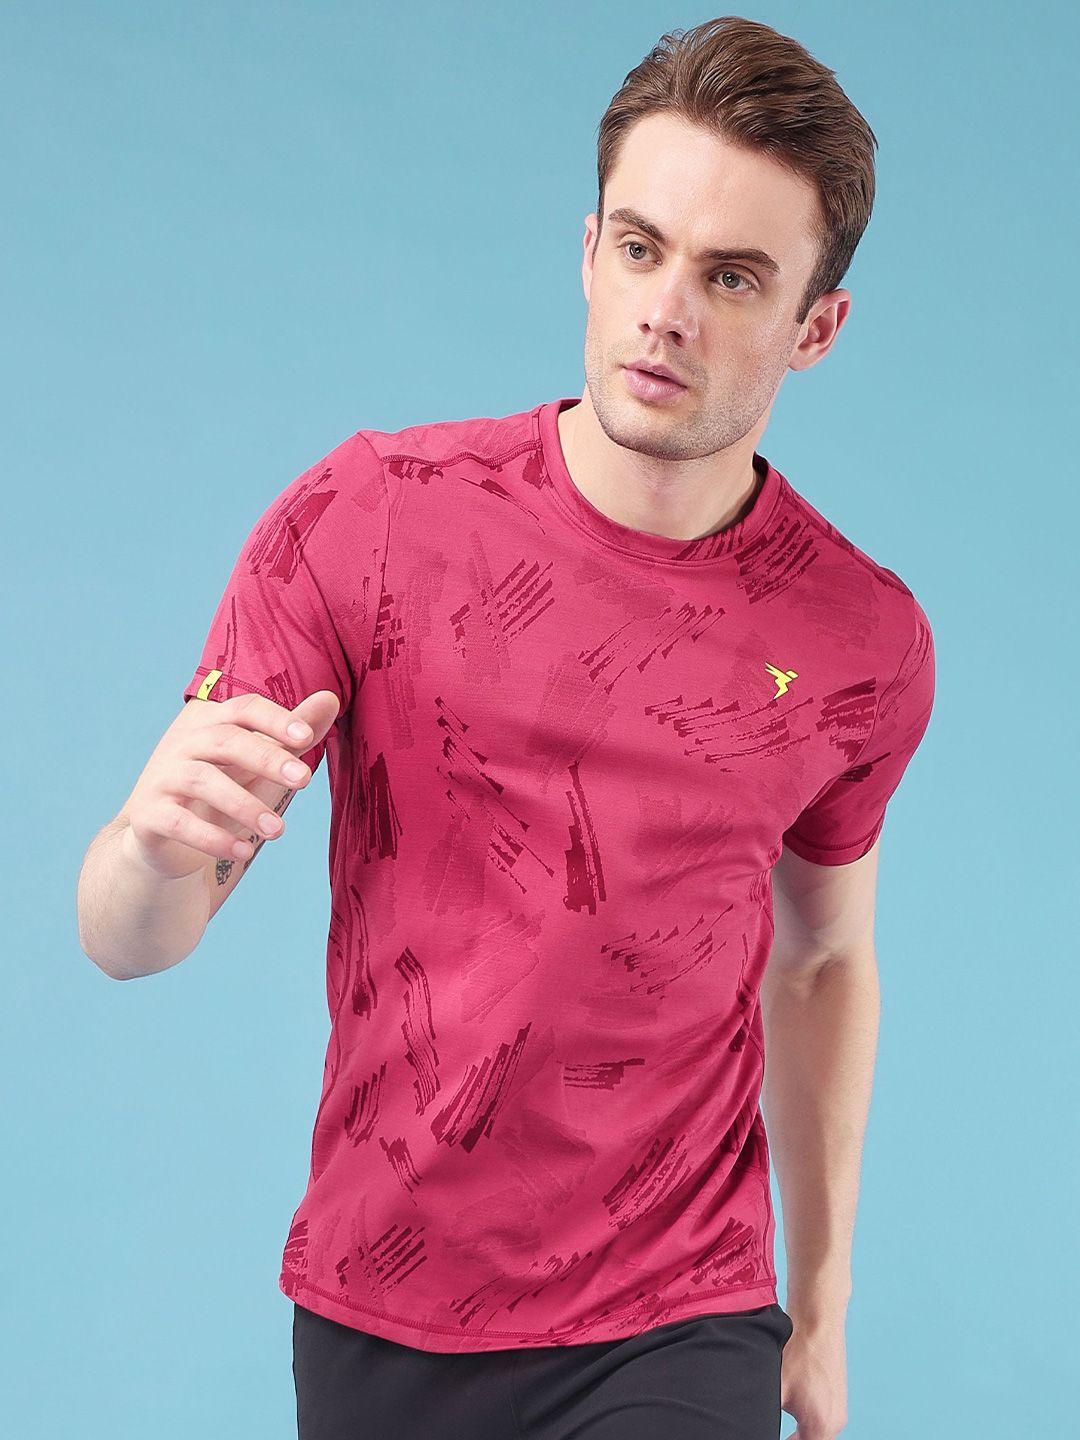 technosport abstract printed antimicrobial slim fit t-shirt